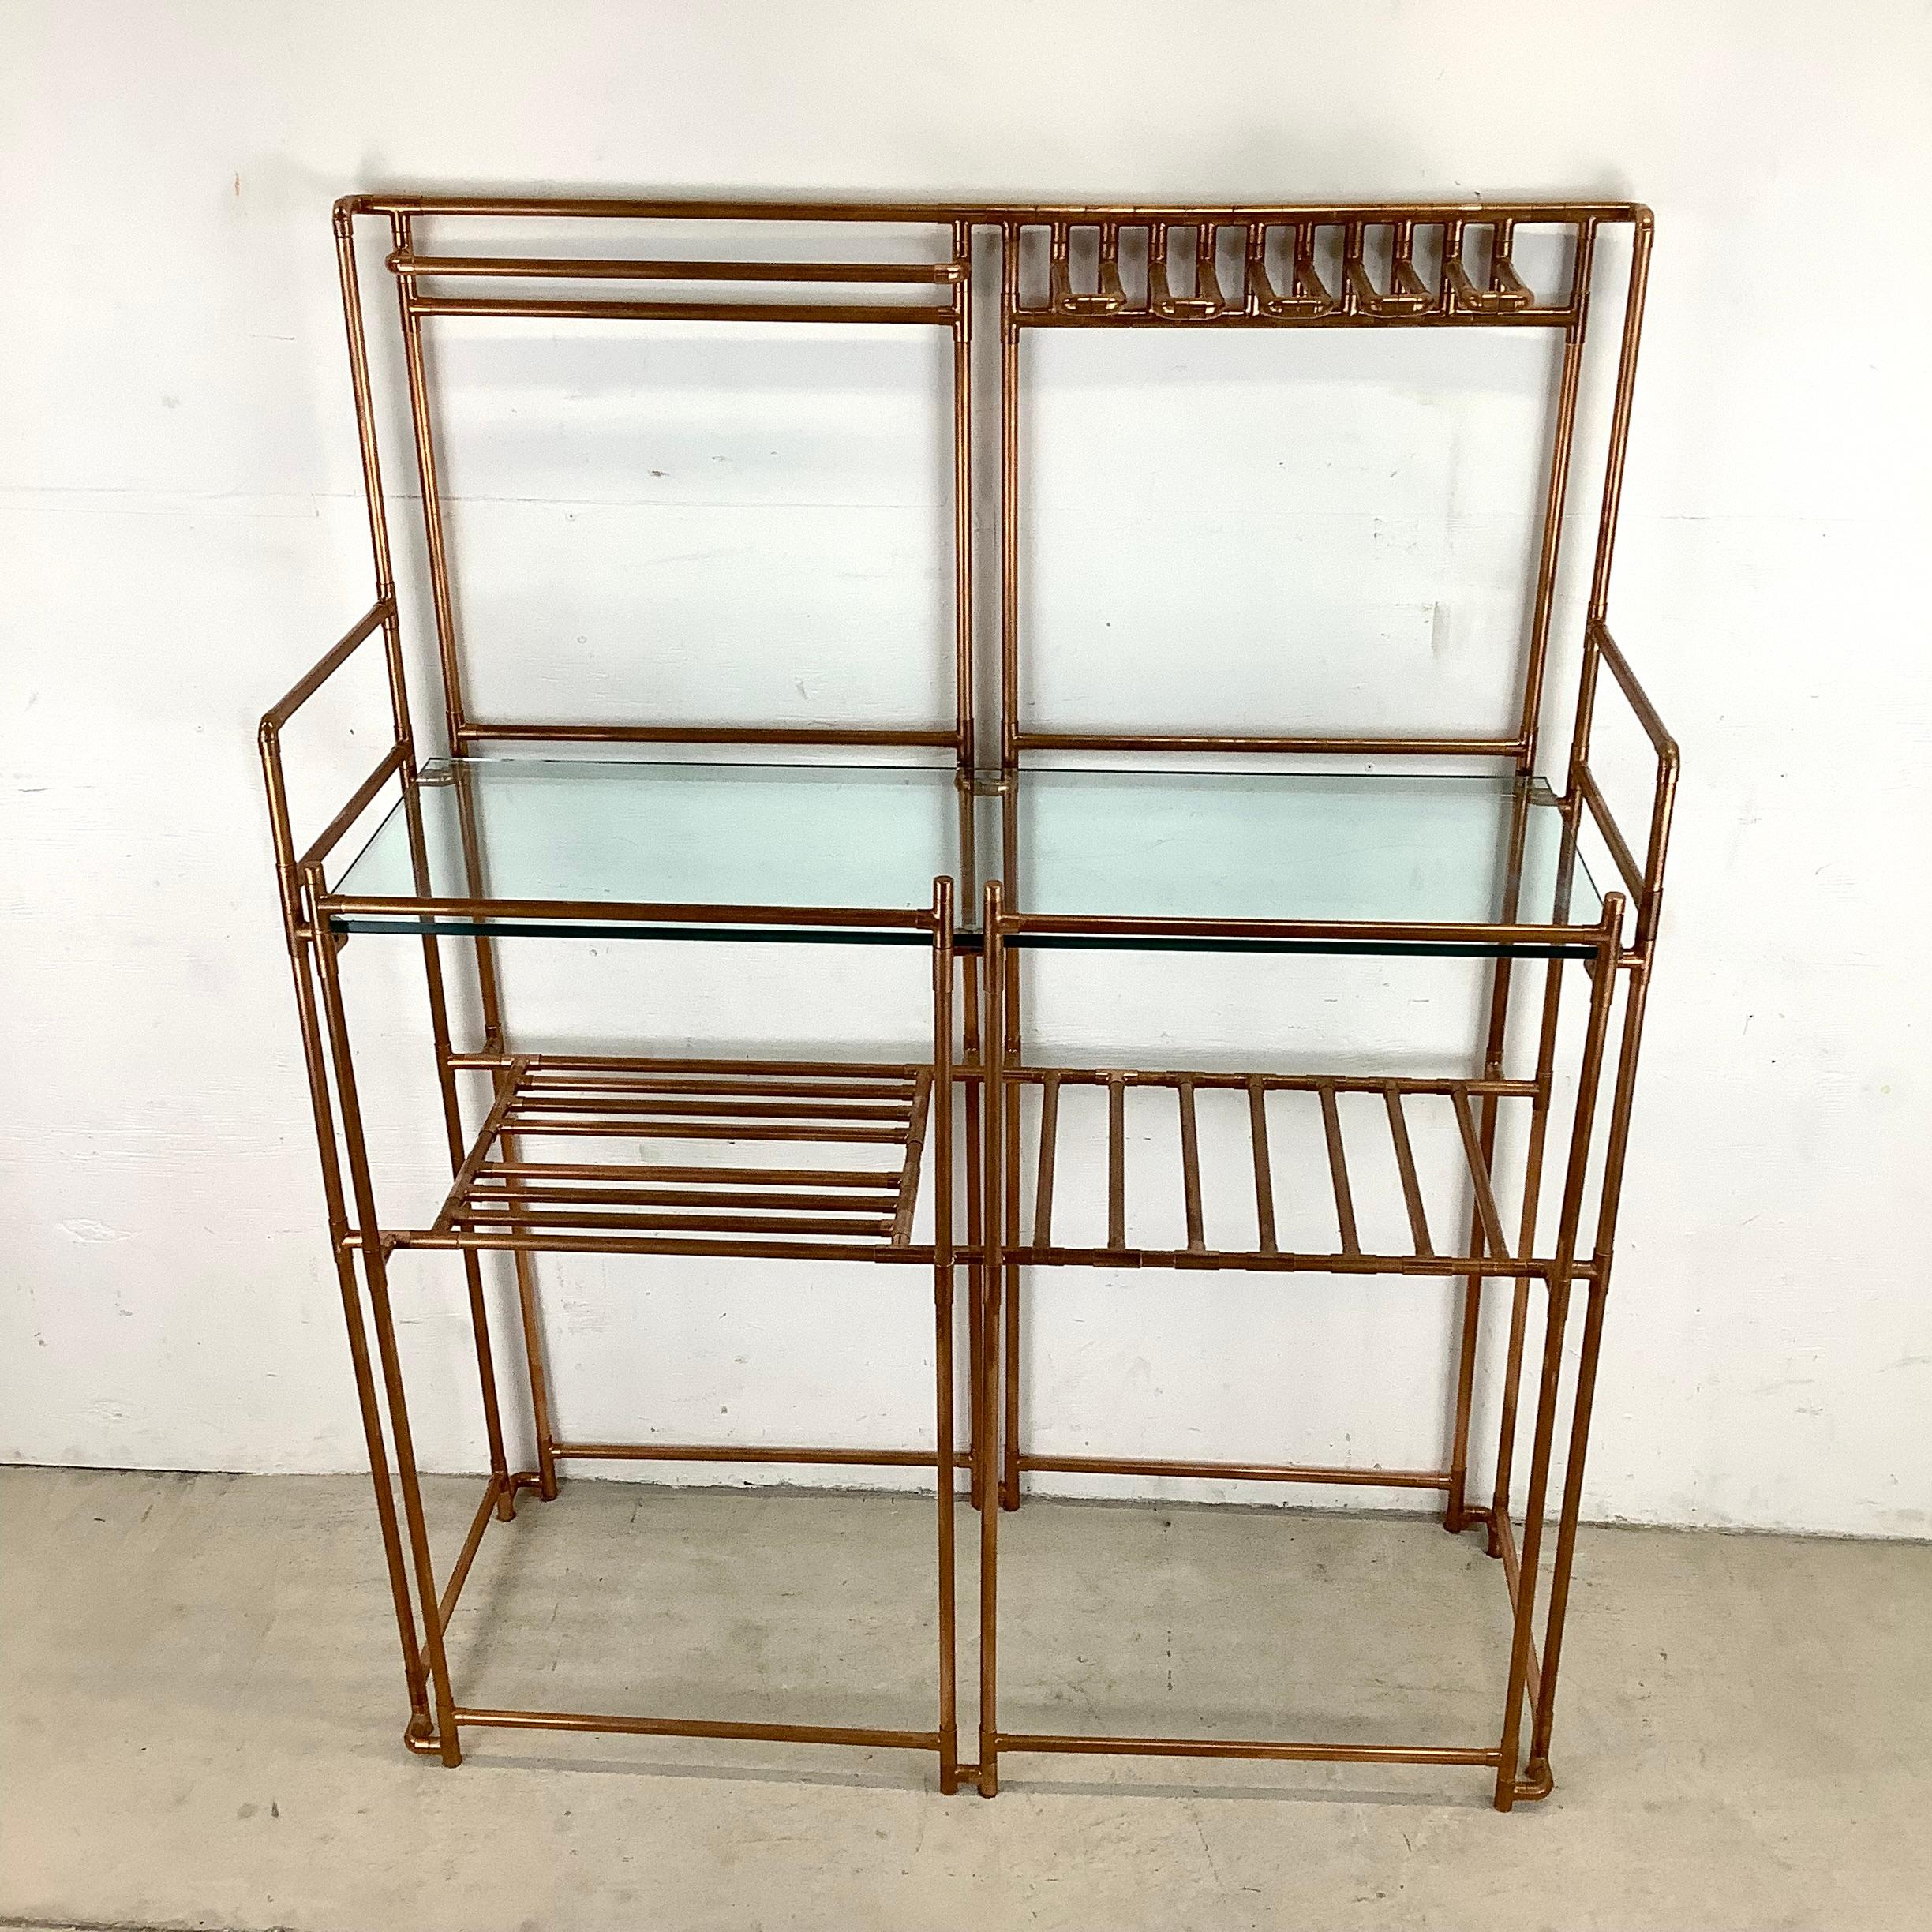 Introducing this Vintage-Inspired Copper Pipe Bakers Rack with Glass Countertop, the perfect addition to your kitchen or dining area. This unique piece blends rustic charm with modern elegance, creating a captivating focal point that is sure to